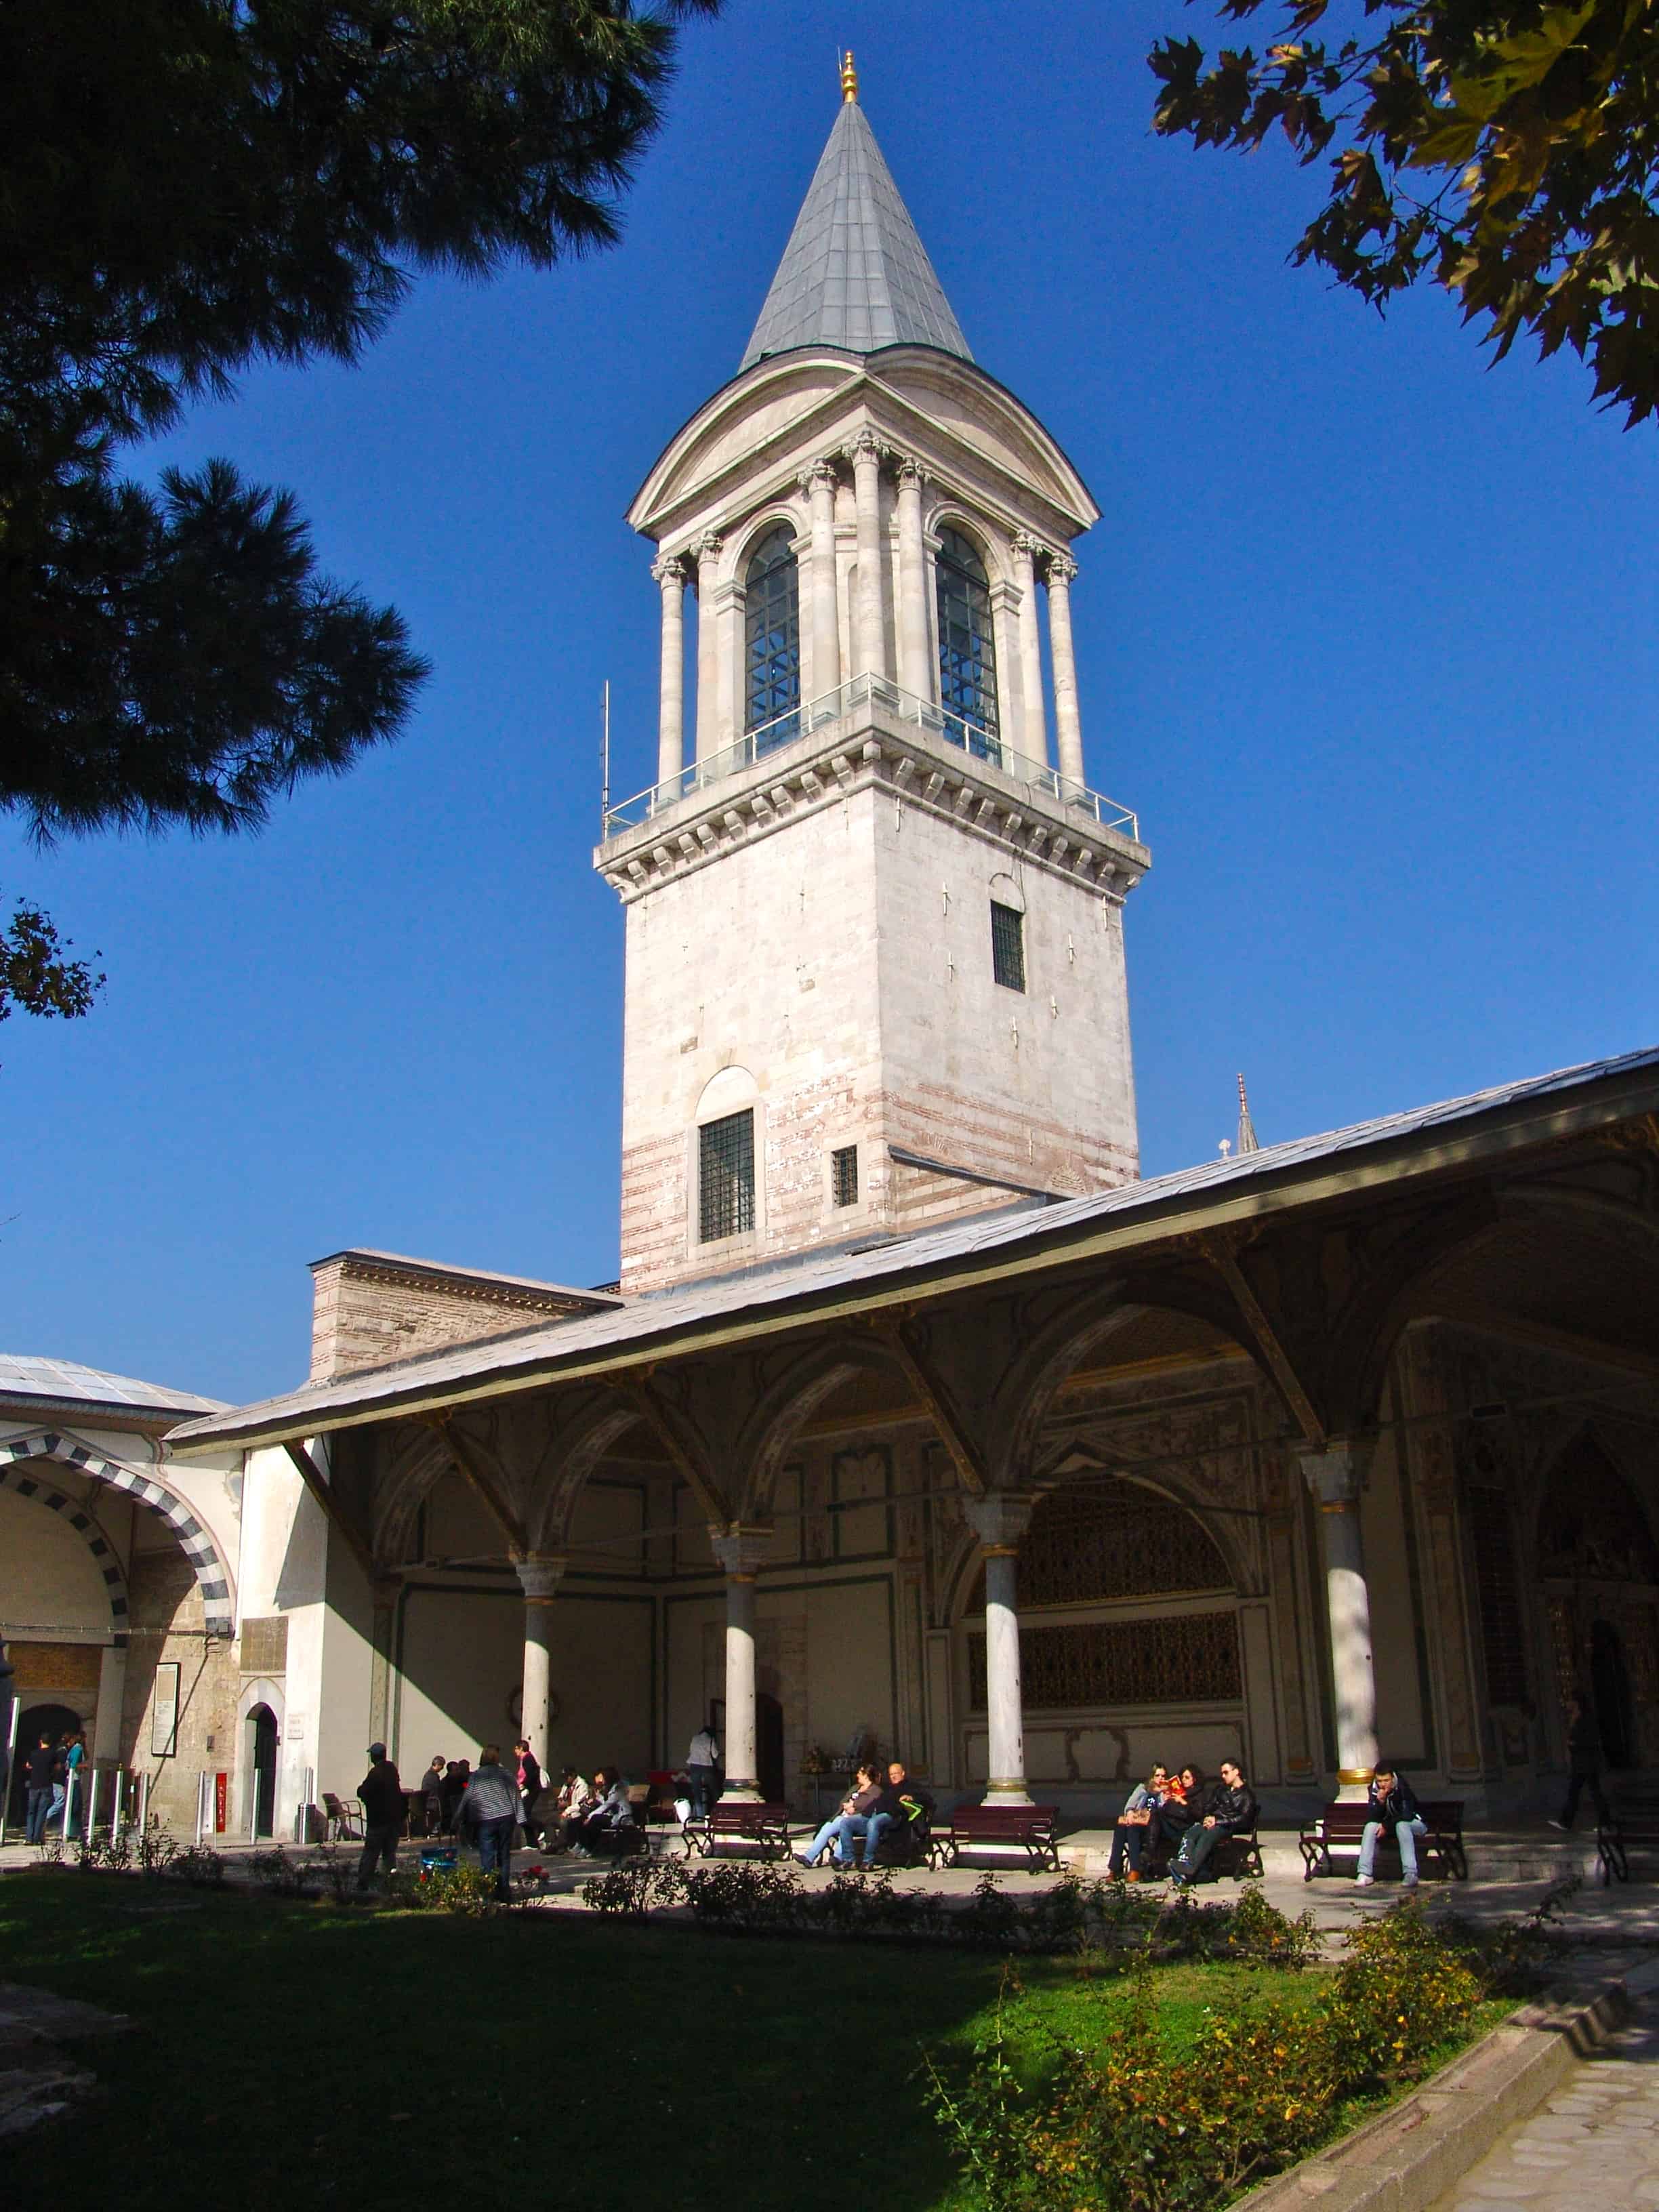 Tower of Justice at Topkapi Palace in Istanbul, Turkey